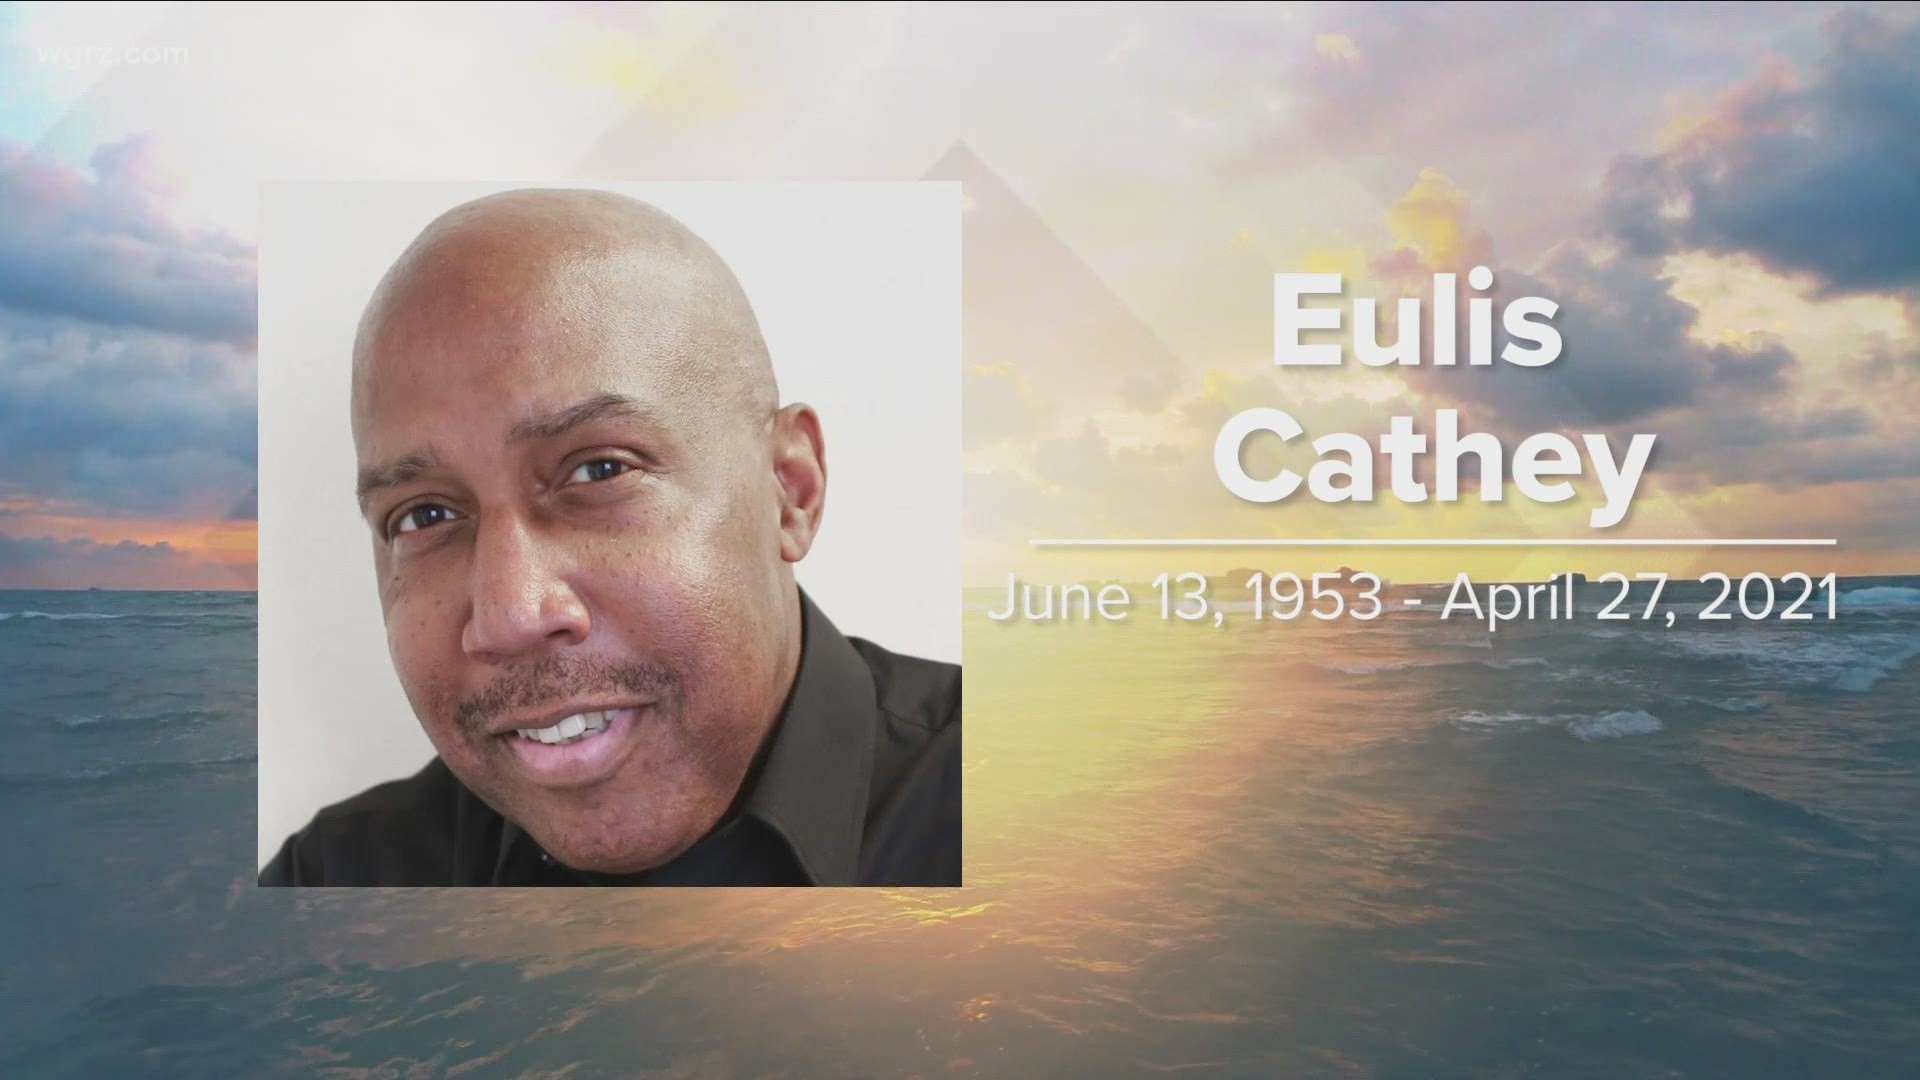 Revered and honored in his profession, Eulis Cathey spent most of his lifetime sharing his love of jazz and family.